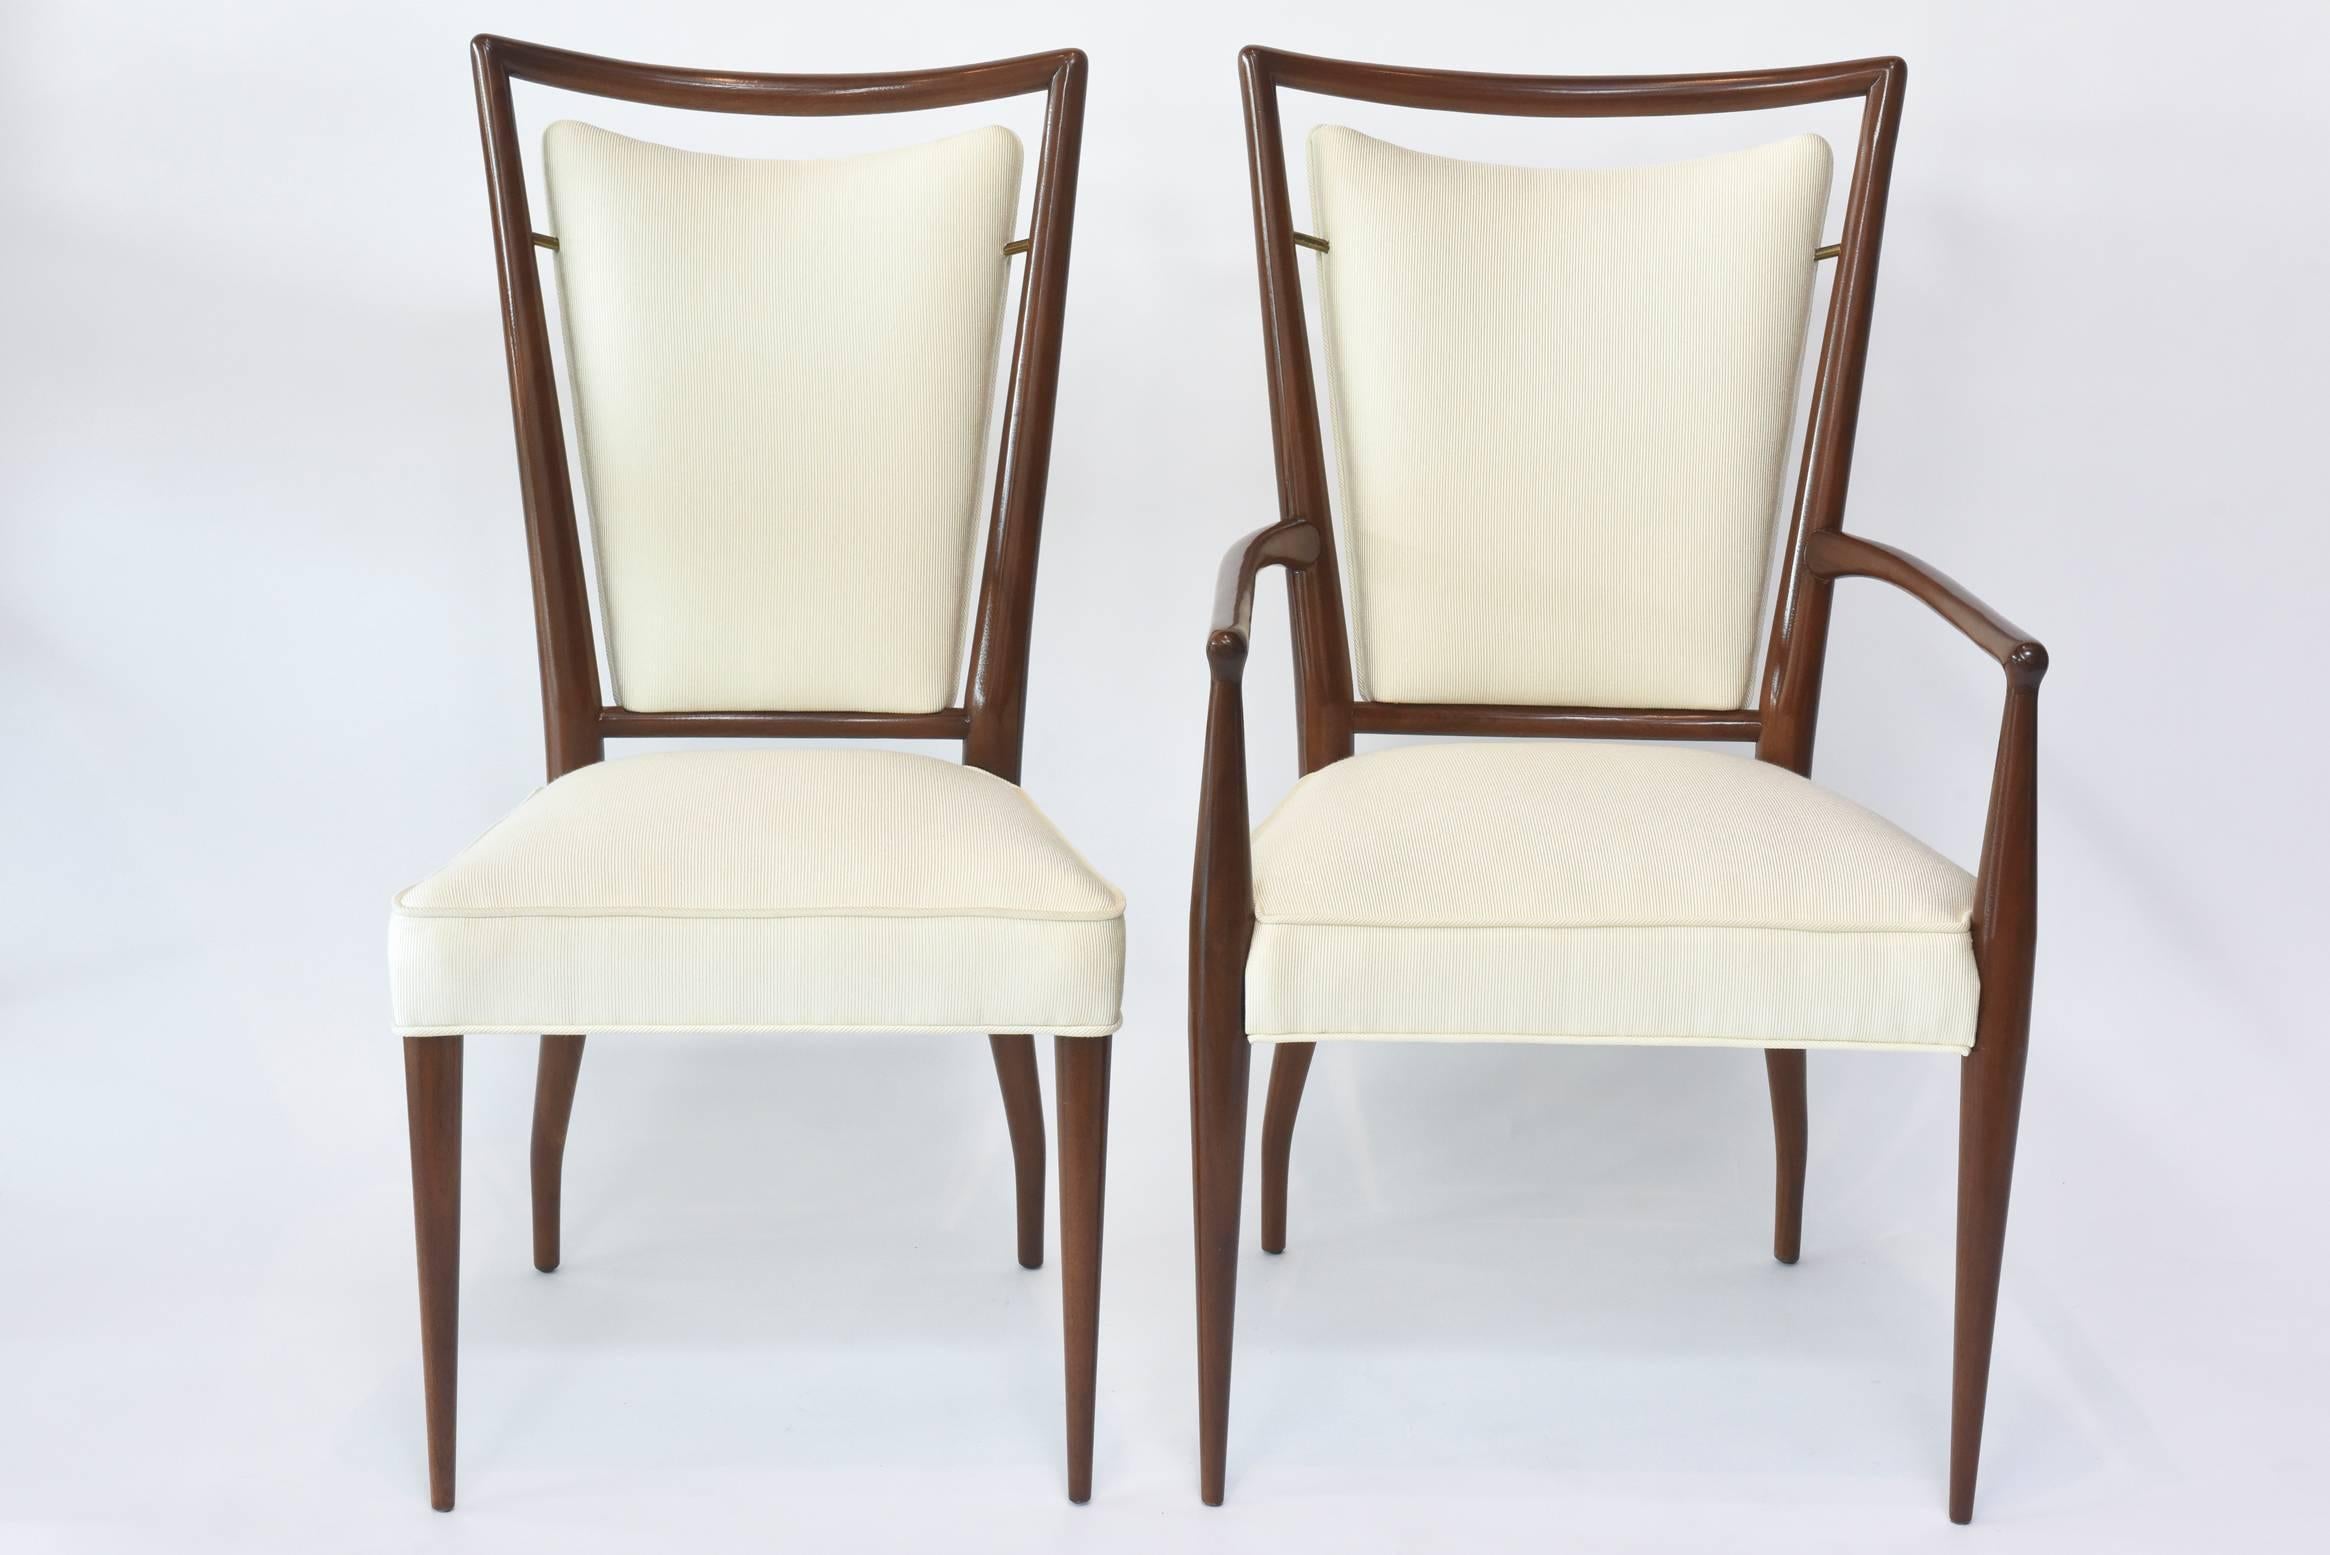 From designer J. Stuart Clingman, this set of 14 American modern walnut and brass dining chairs made in the1950s comes with sleek tapered spindle legs with upholstered backrest encased in a spindled frame gently resting on delicate brass hinges.